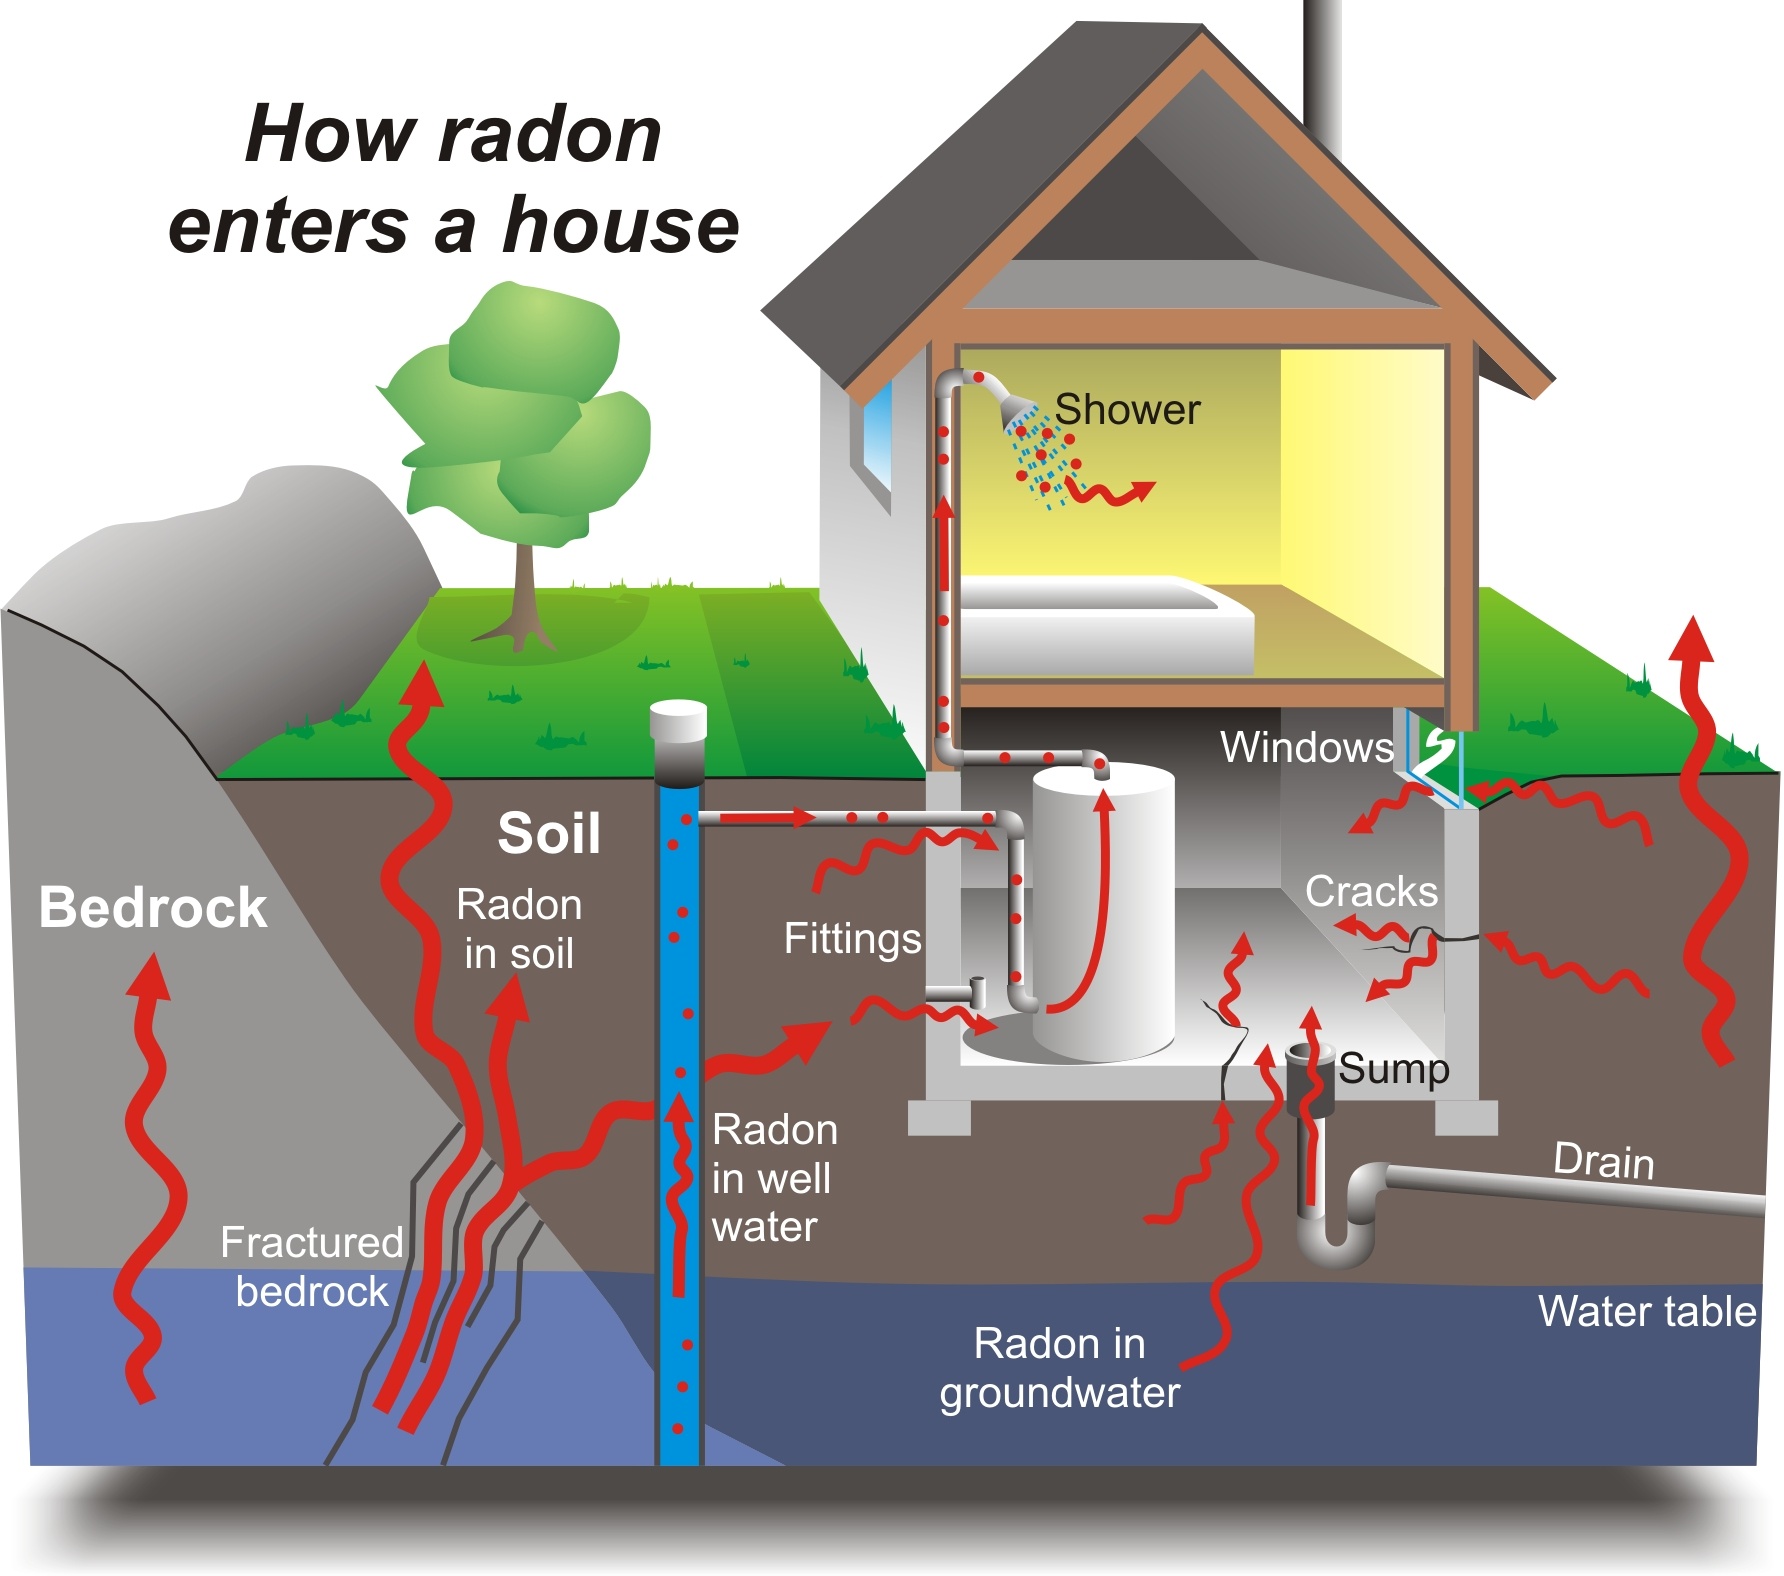 radon mitigation system: do it yourself or hire somebody? | the